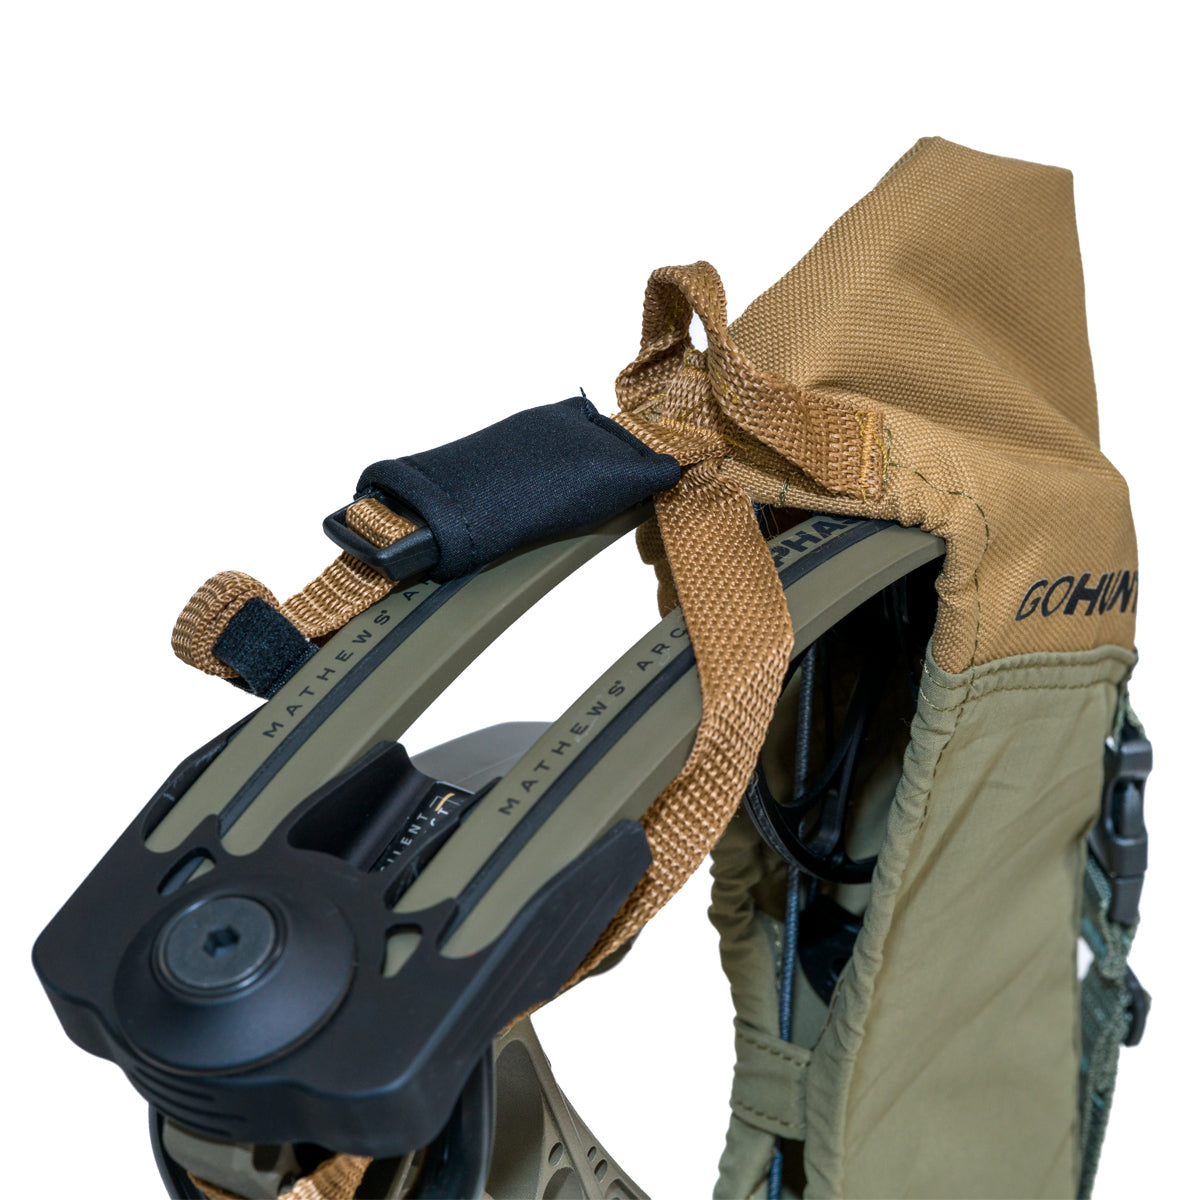 GOHUNT Compound Bow Sling in  by GOHUNT | GOHUNT - GOHUNT Shop